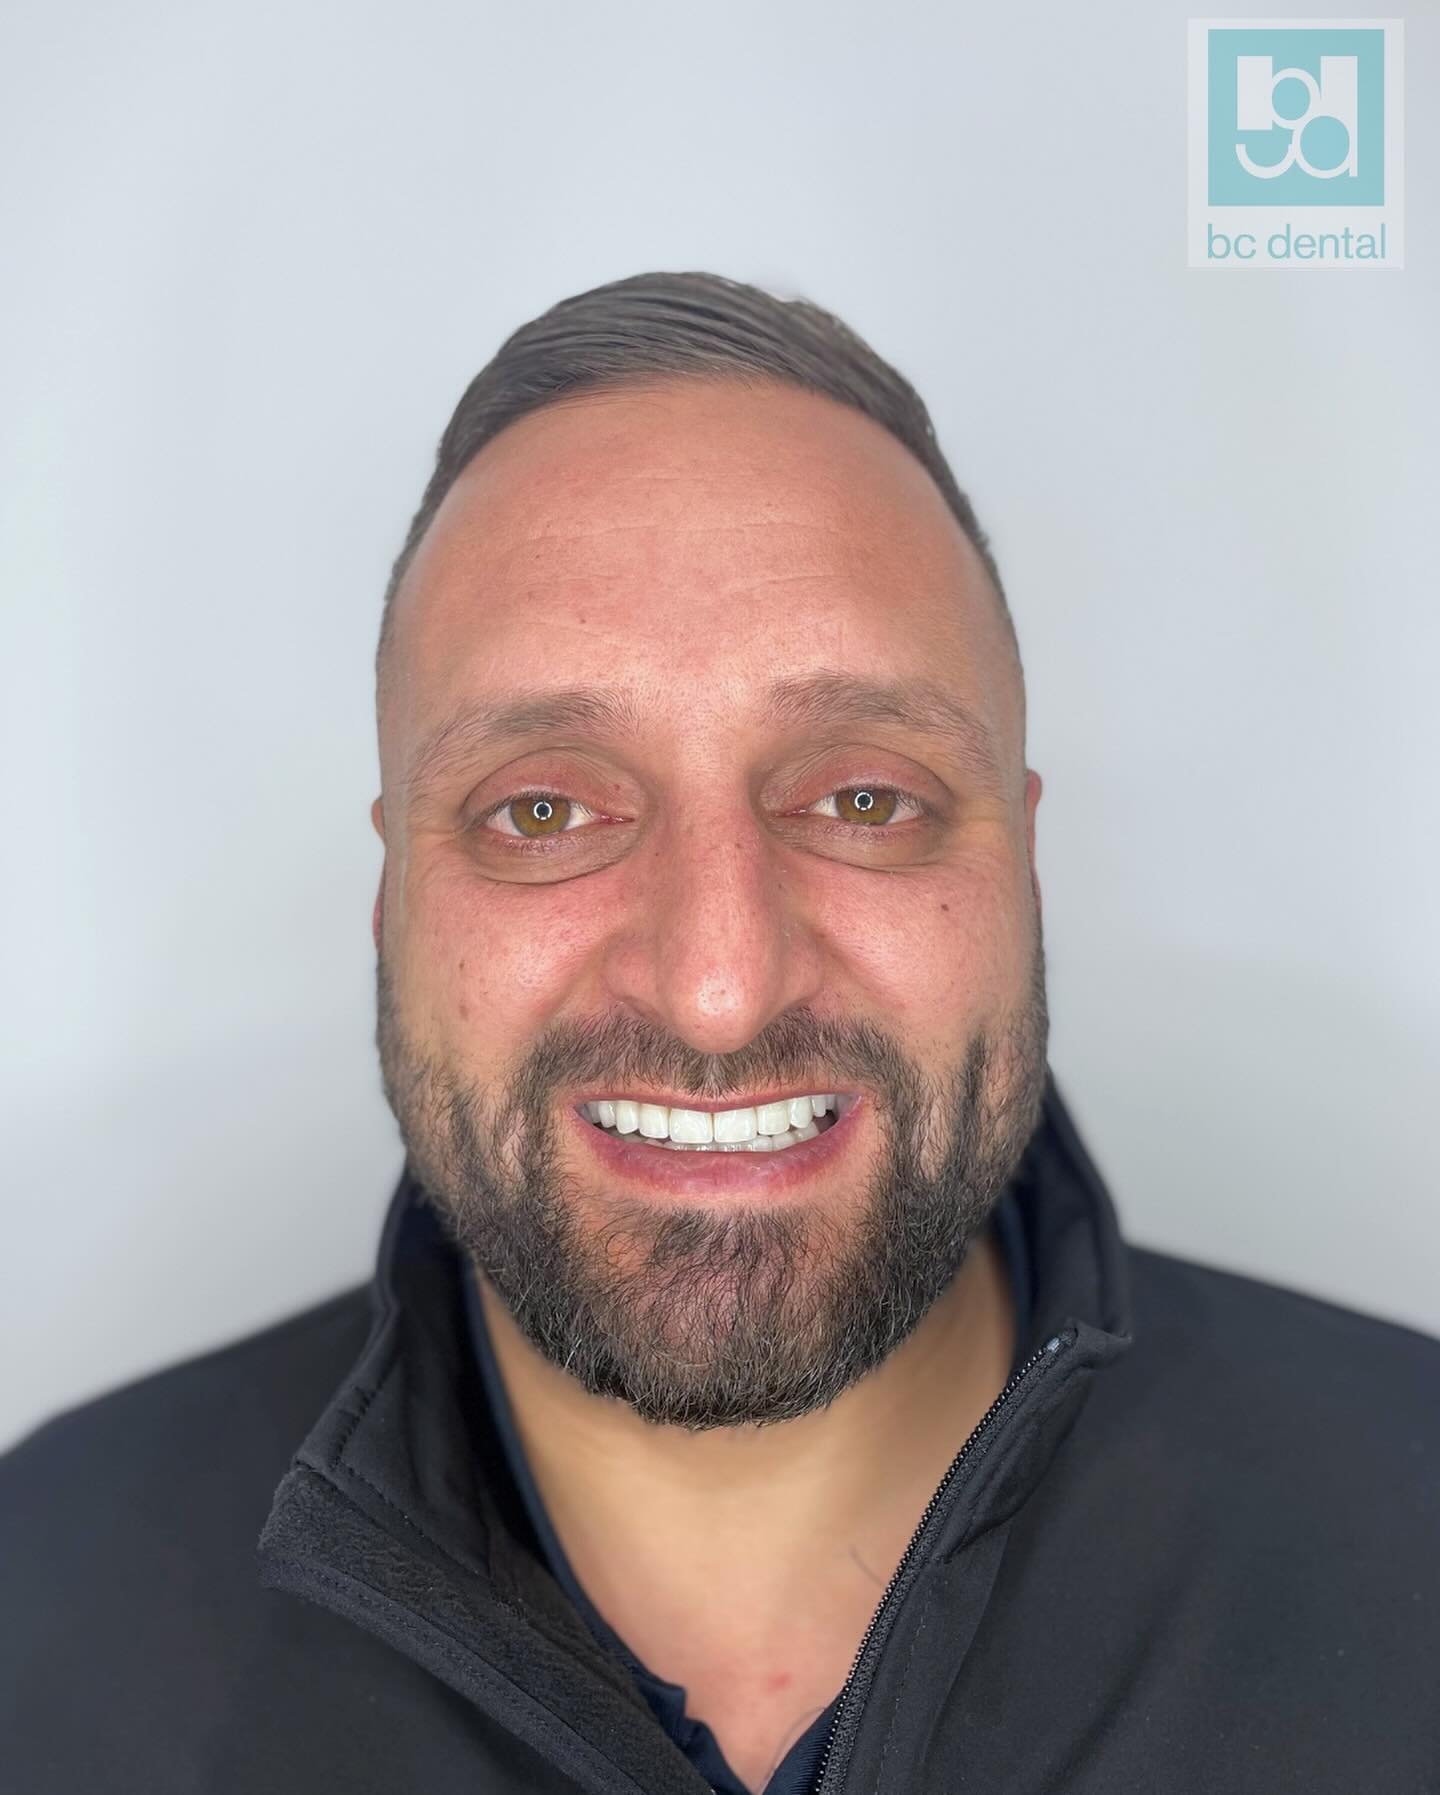 Patient ✨ transformation ✨Tuesday! 

A great result for our wonderful patient who wanted to brighten up his smile. @drvalroberts completed this transformation with Veneers and our patient can&rsquo;t stop smiling - you can see why 😁😁

#bcdental #ba